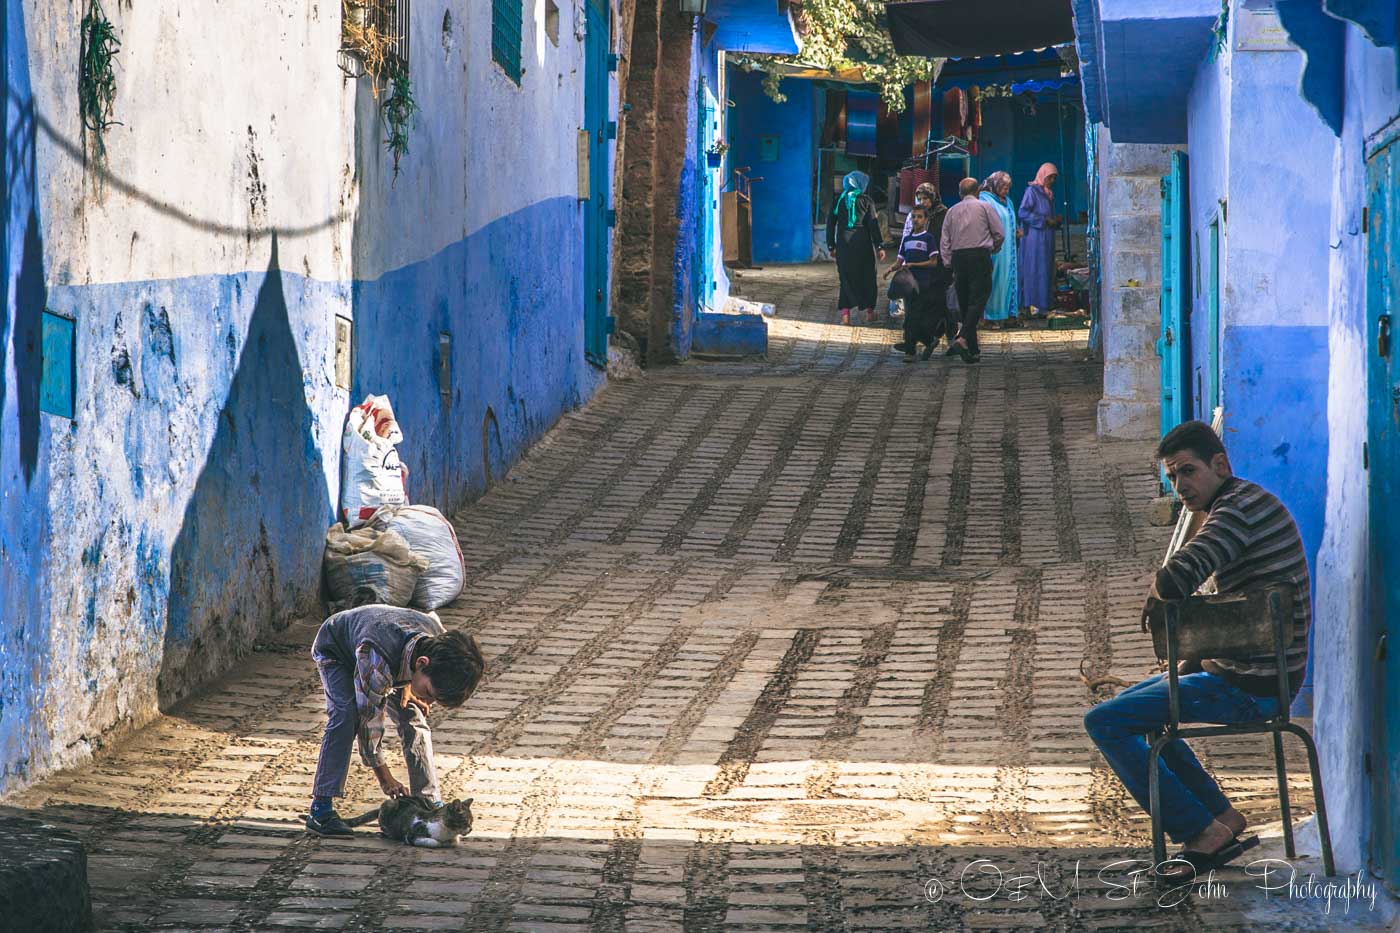 Chefchaouen is full of cats and kids. Morocco